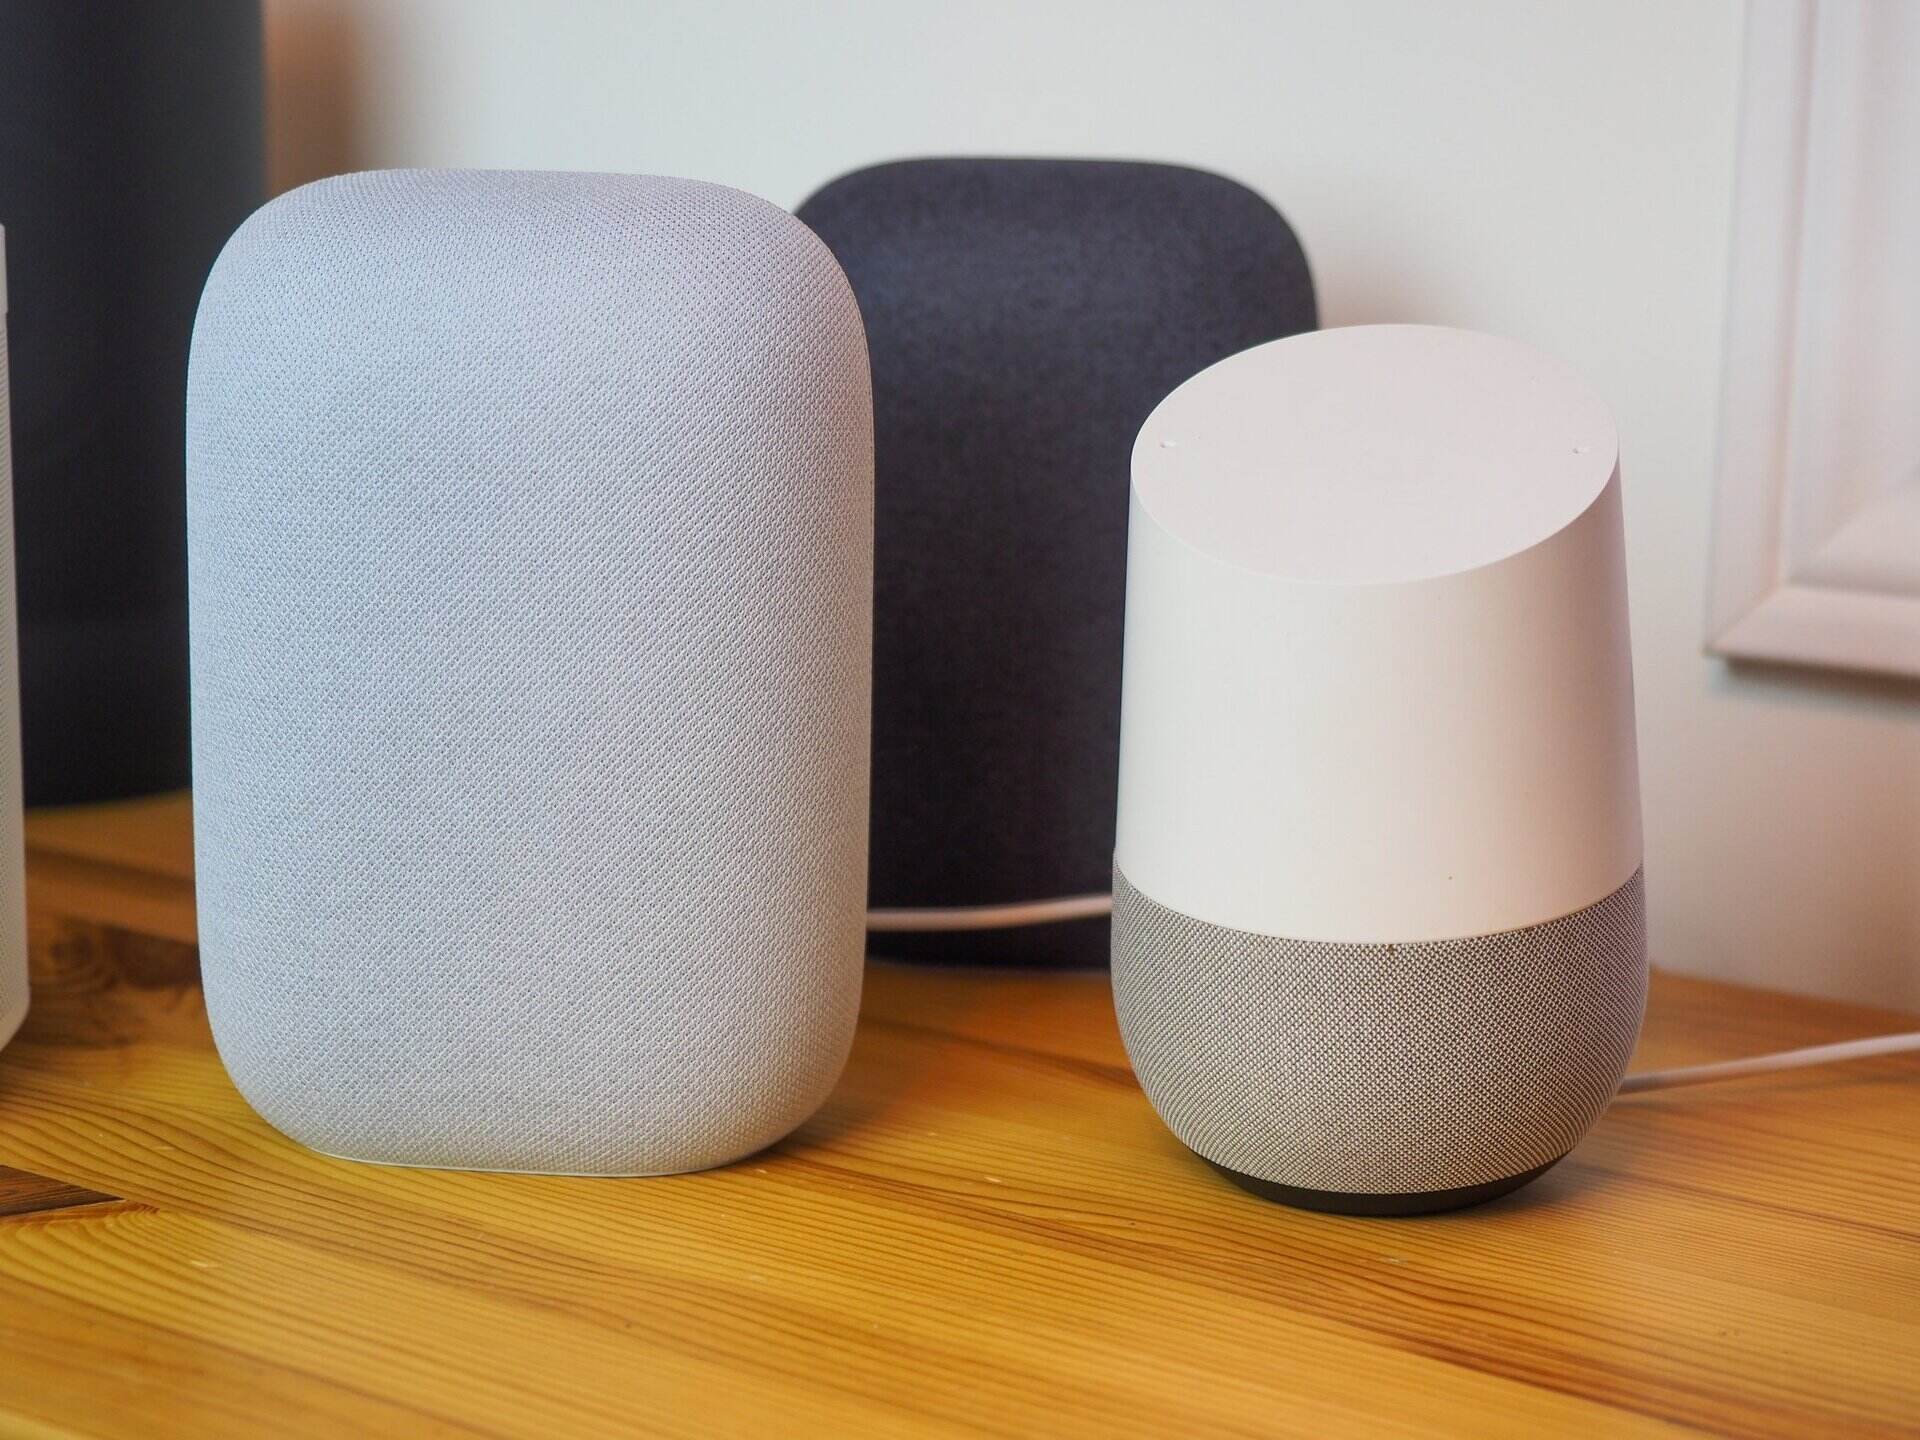 How To Merge Nest And Google Home